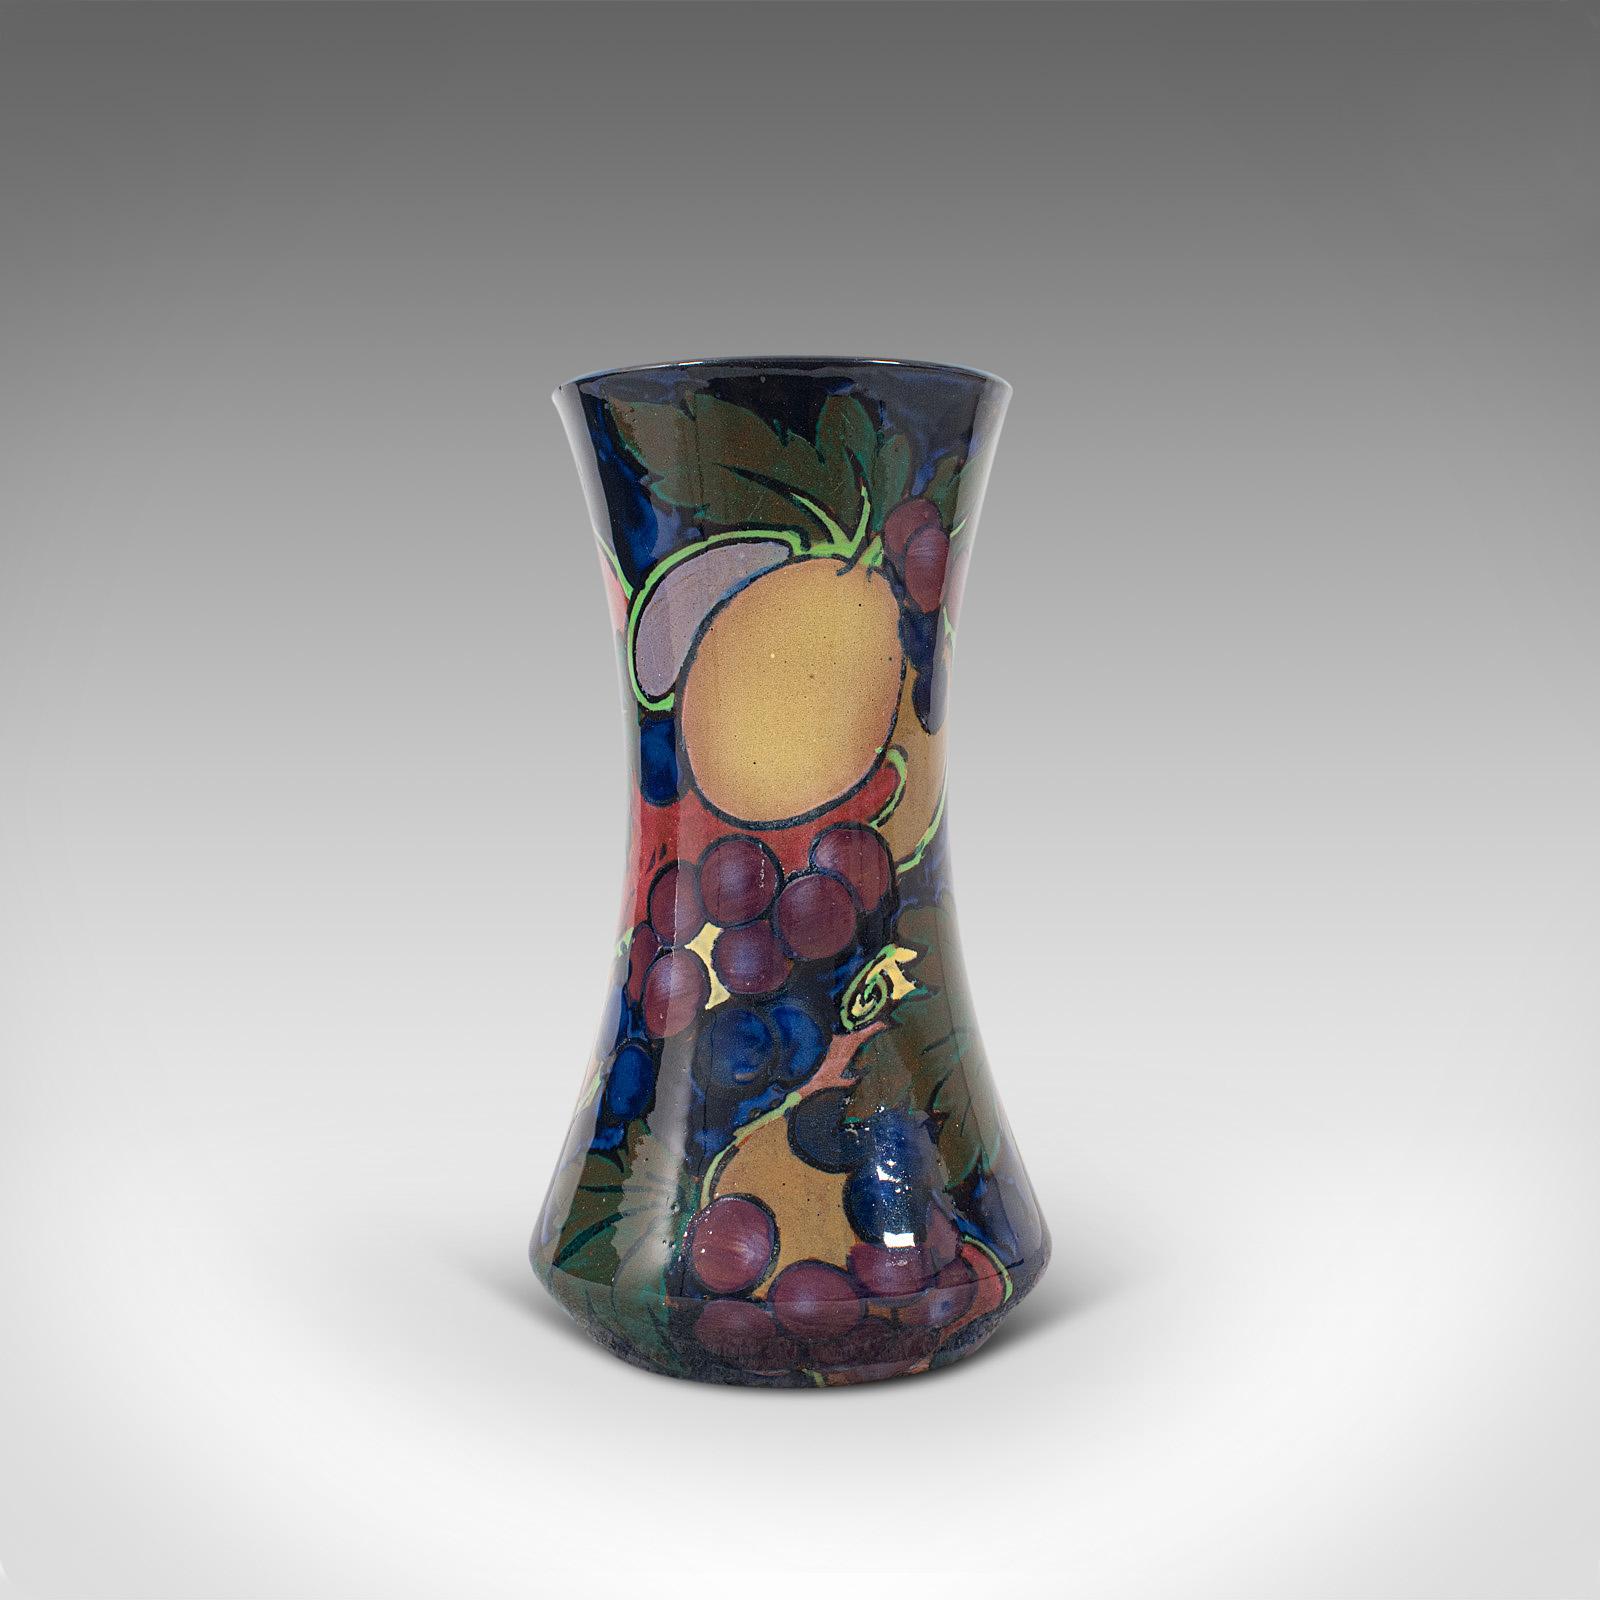 This is a small vintage decorative vase. An English, ceramic baluster flower display vase, dating to the early 20th century, circa 1930.

Pleasingly colorful and diminutive in form
Displays a desirable aged patina
Ceramic in good order with